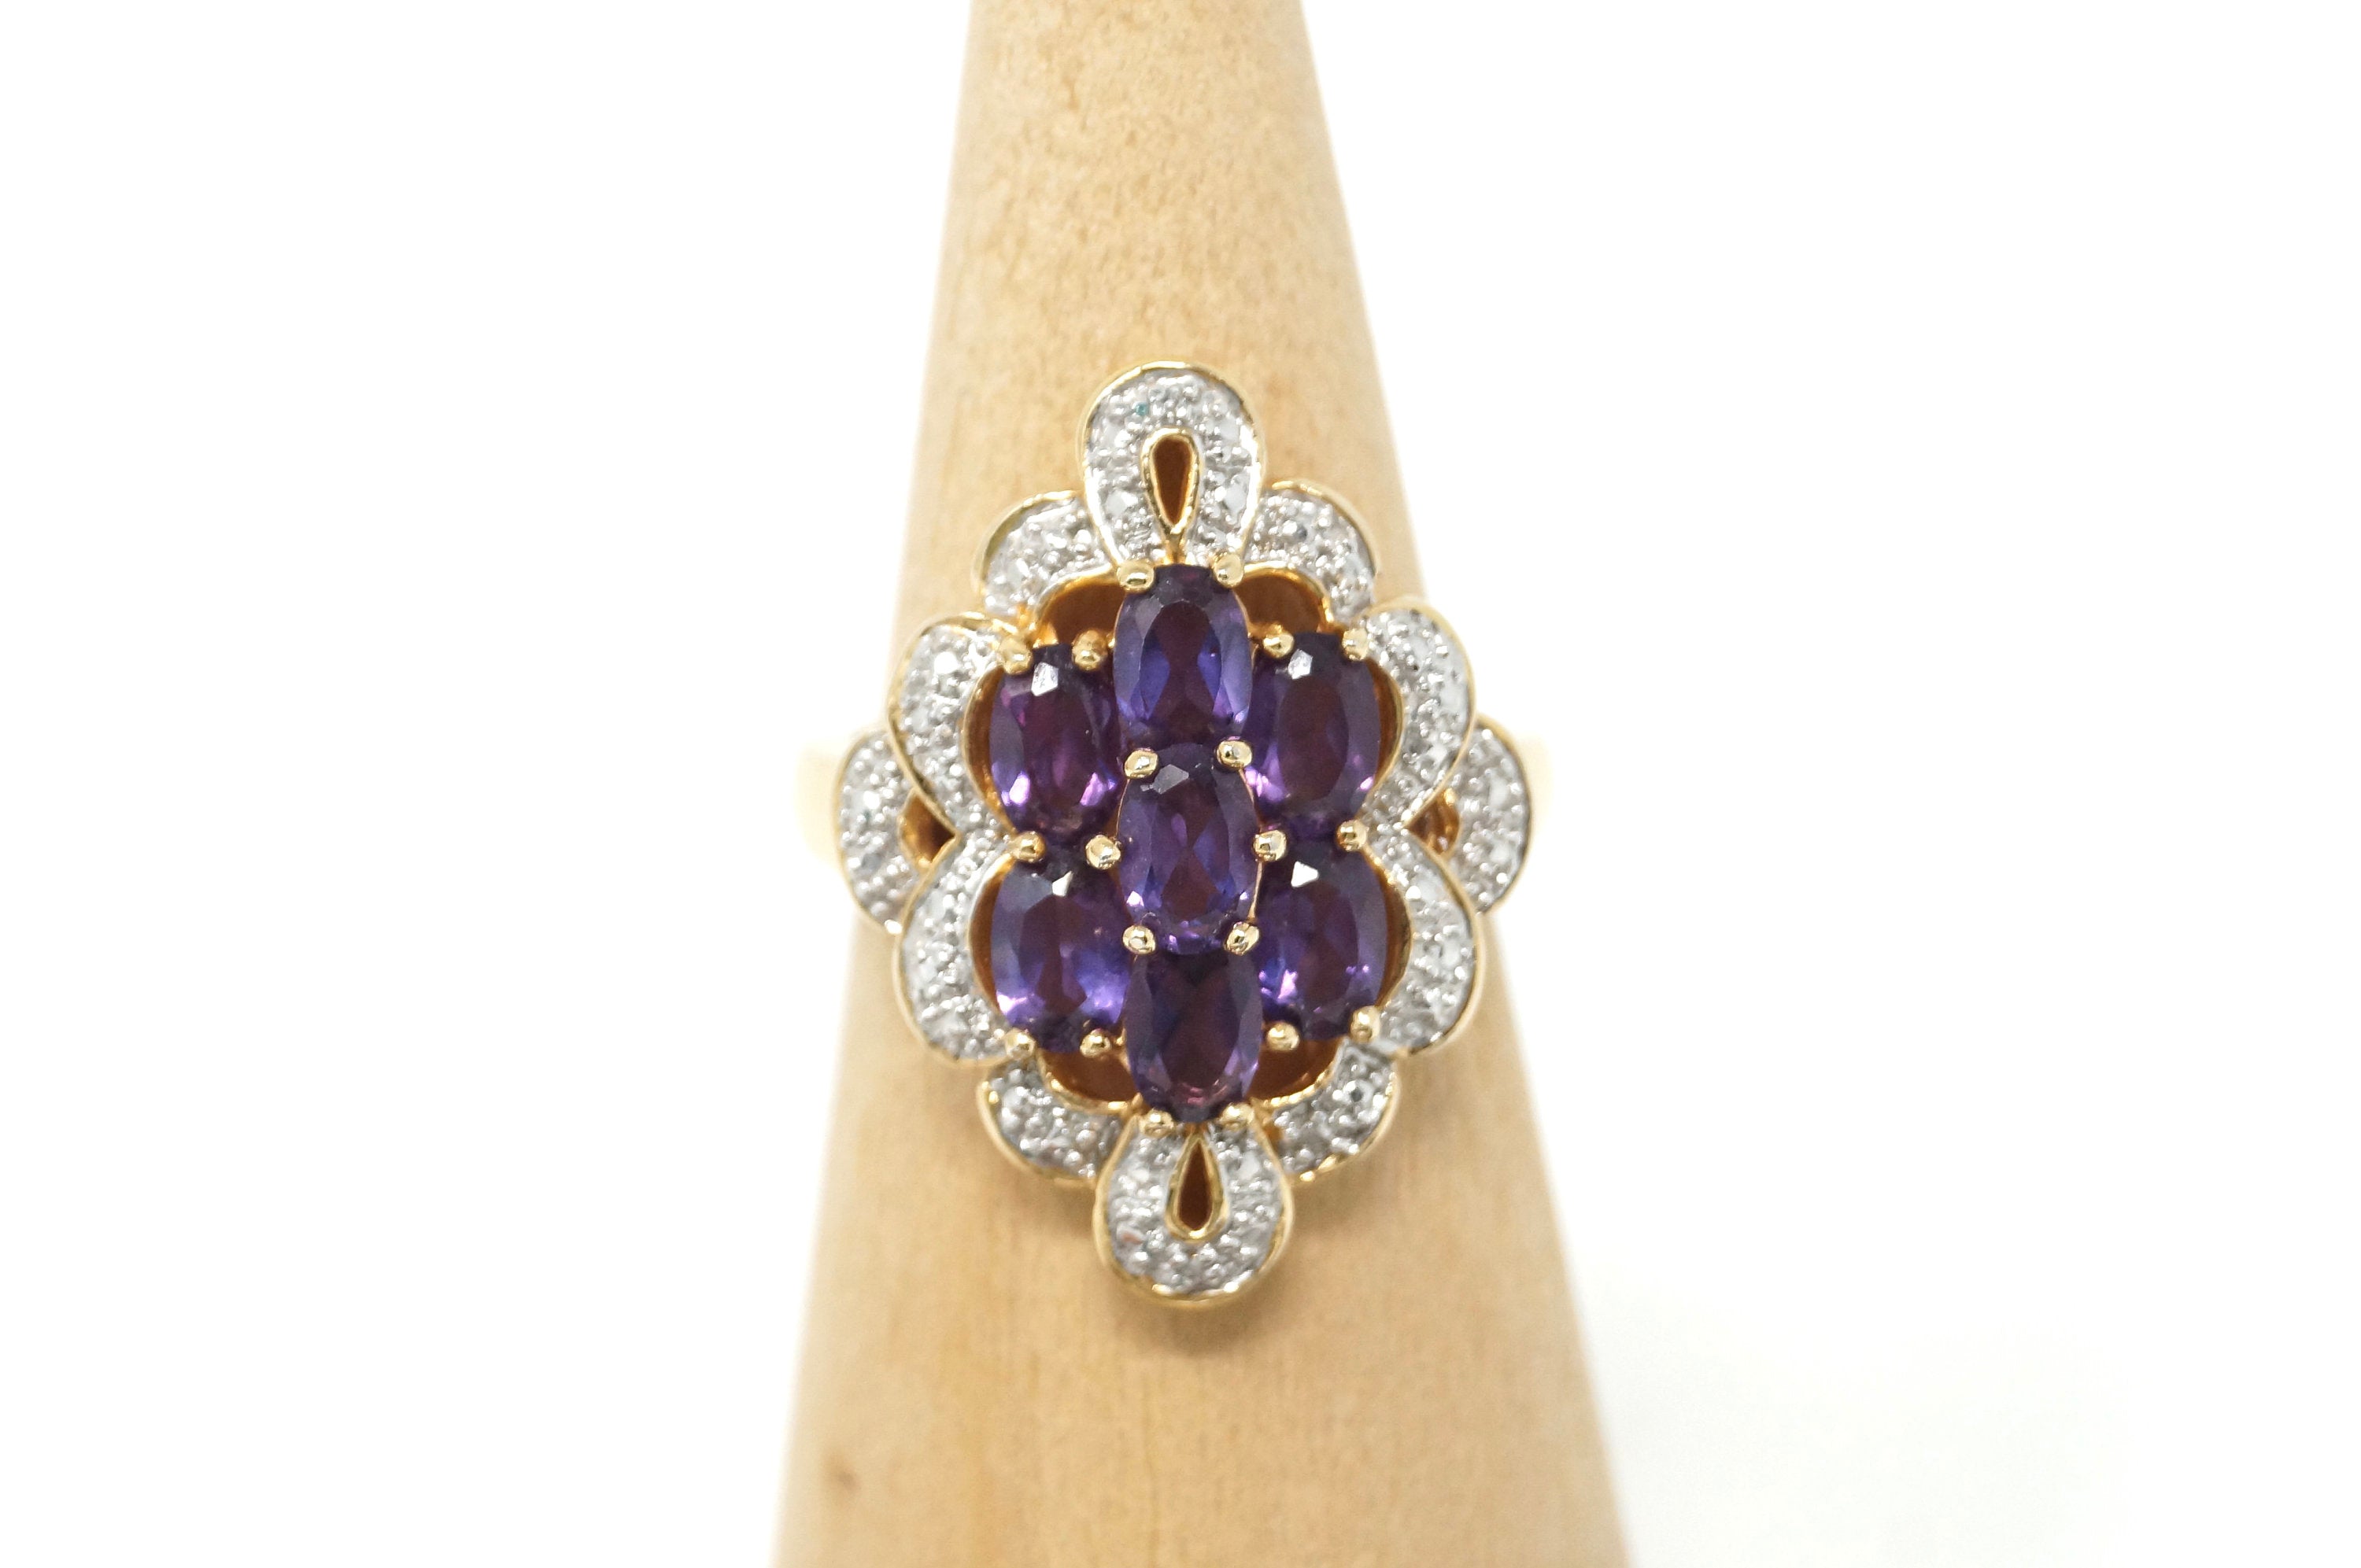 Vintage Stunning Art Deco Style Amethyst Sterling Silver Statement Ring Sz 10